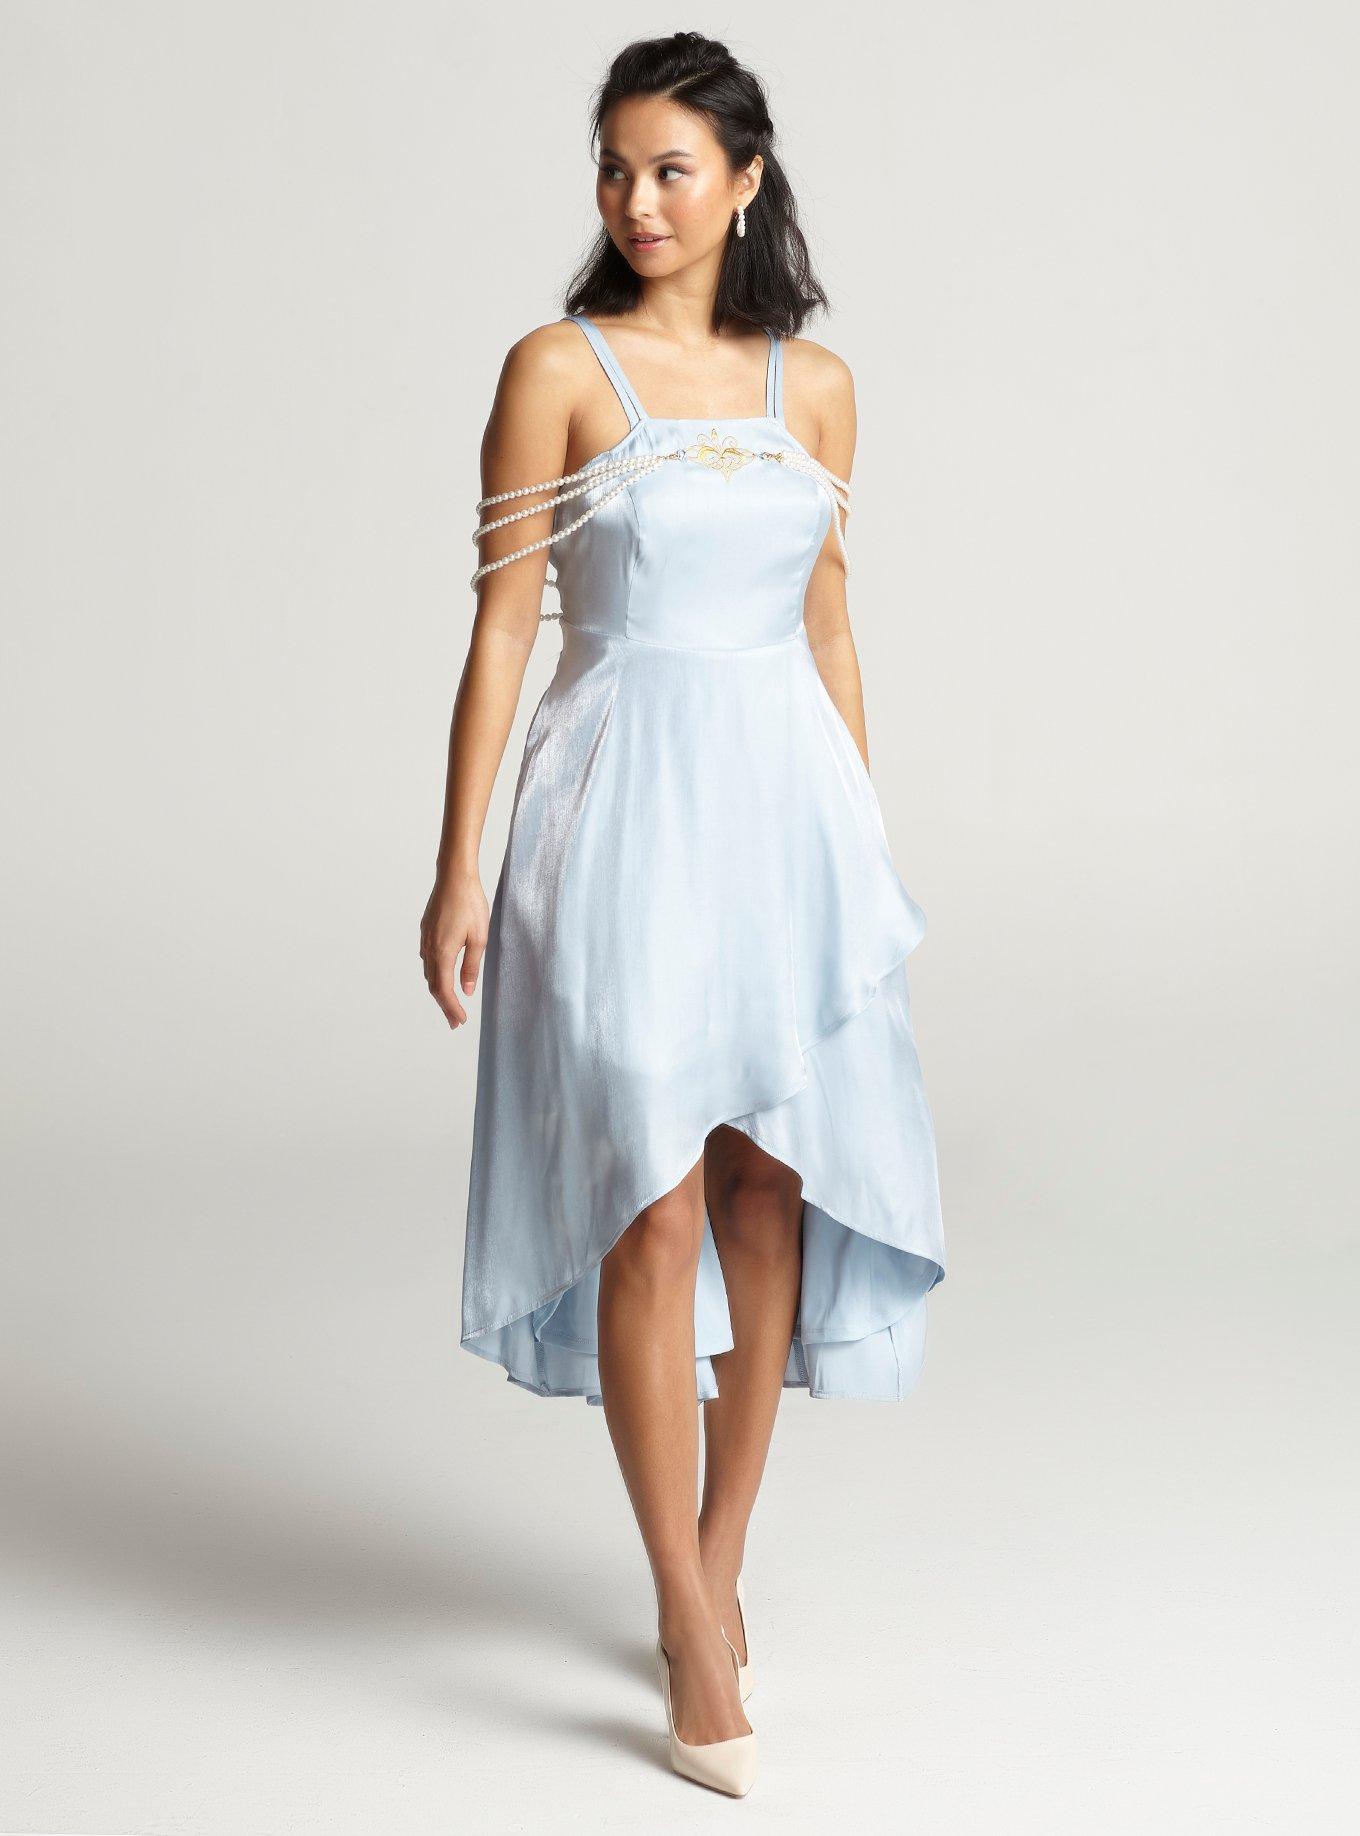 Her Universe Star Wars Padme Pearl Strap Dress Her Universe Exclusive, LIGHT BLUE, hi-res